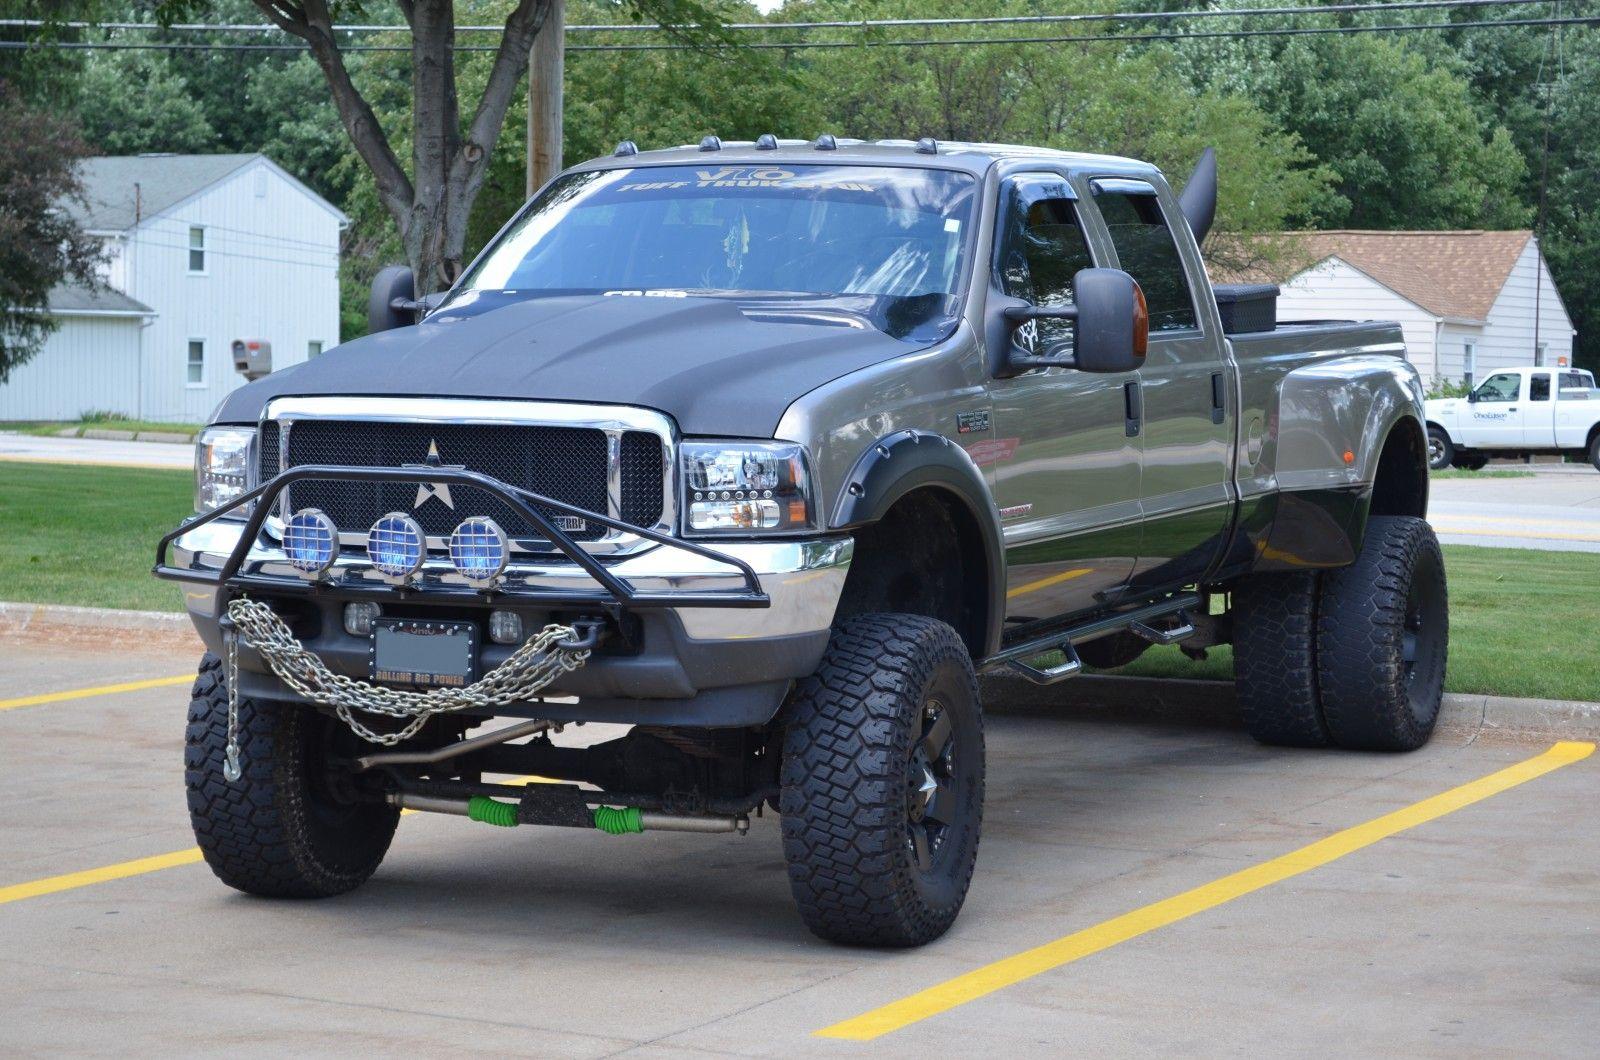 Lot Shots Find Of The Week: Ford F 350 Diesel